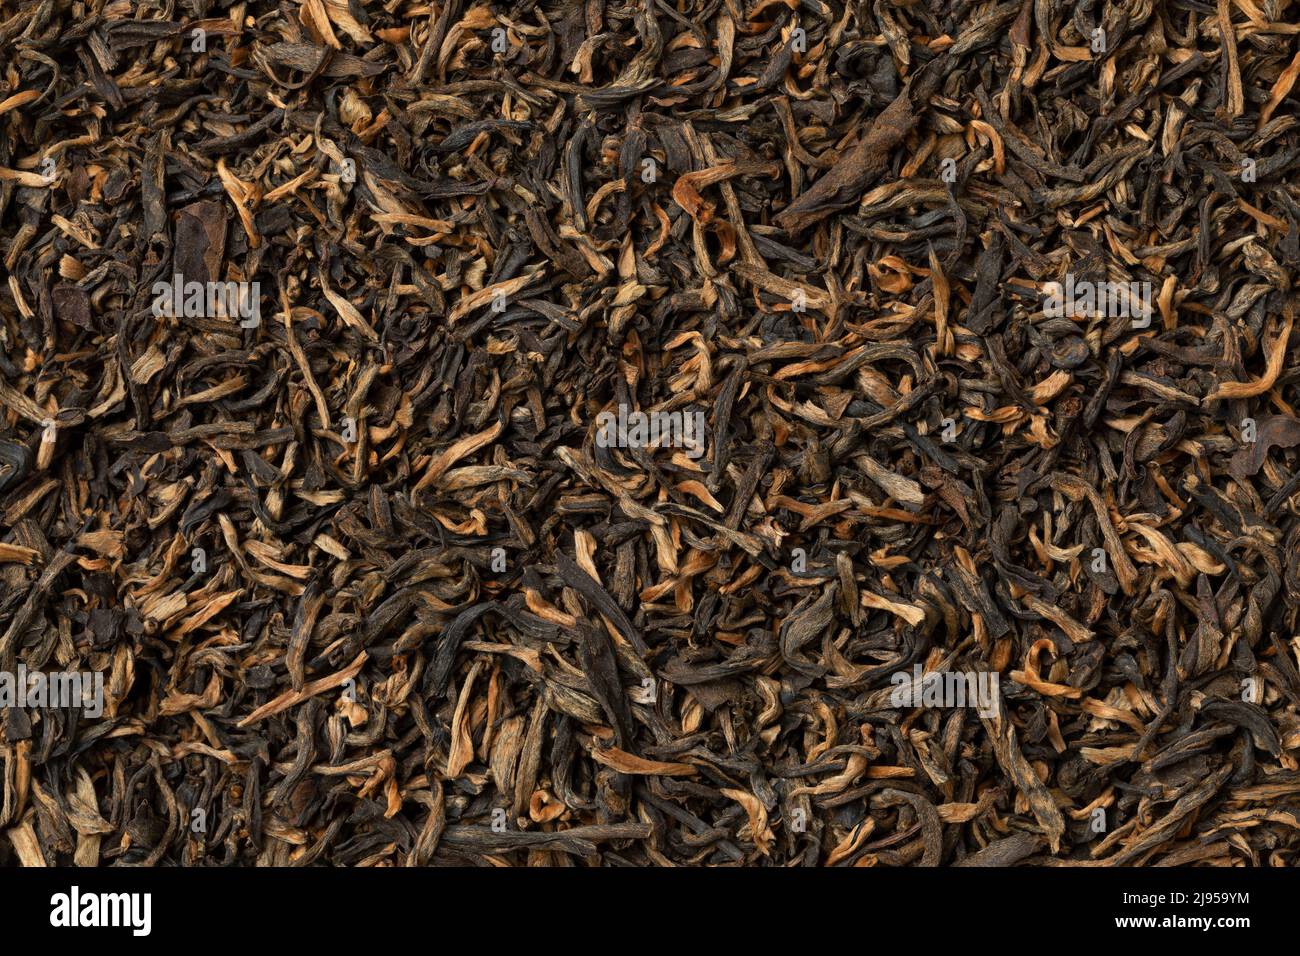 Dried Chinese Yunnan Mao Feng tea leaves close up full frame as background Stock Photo